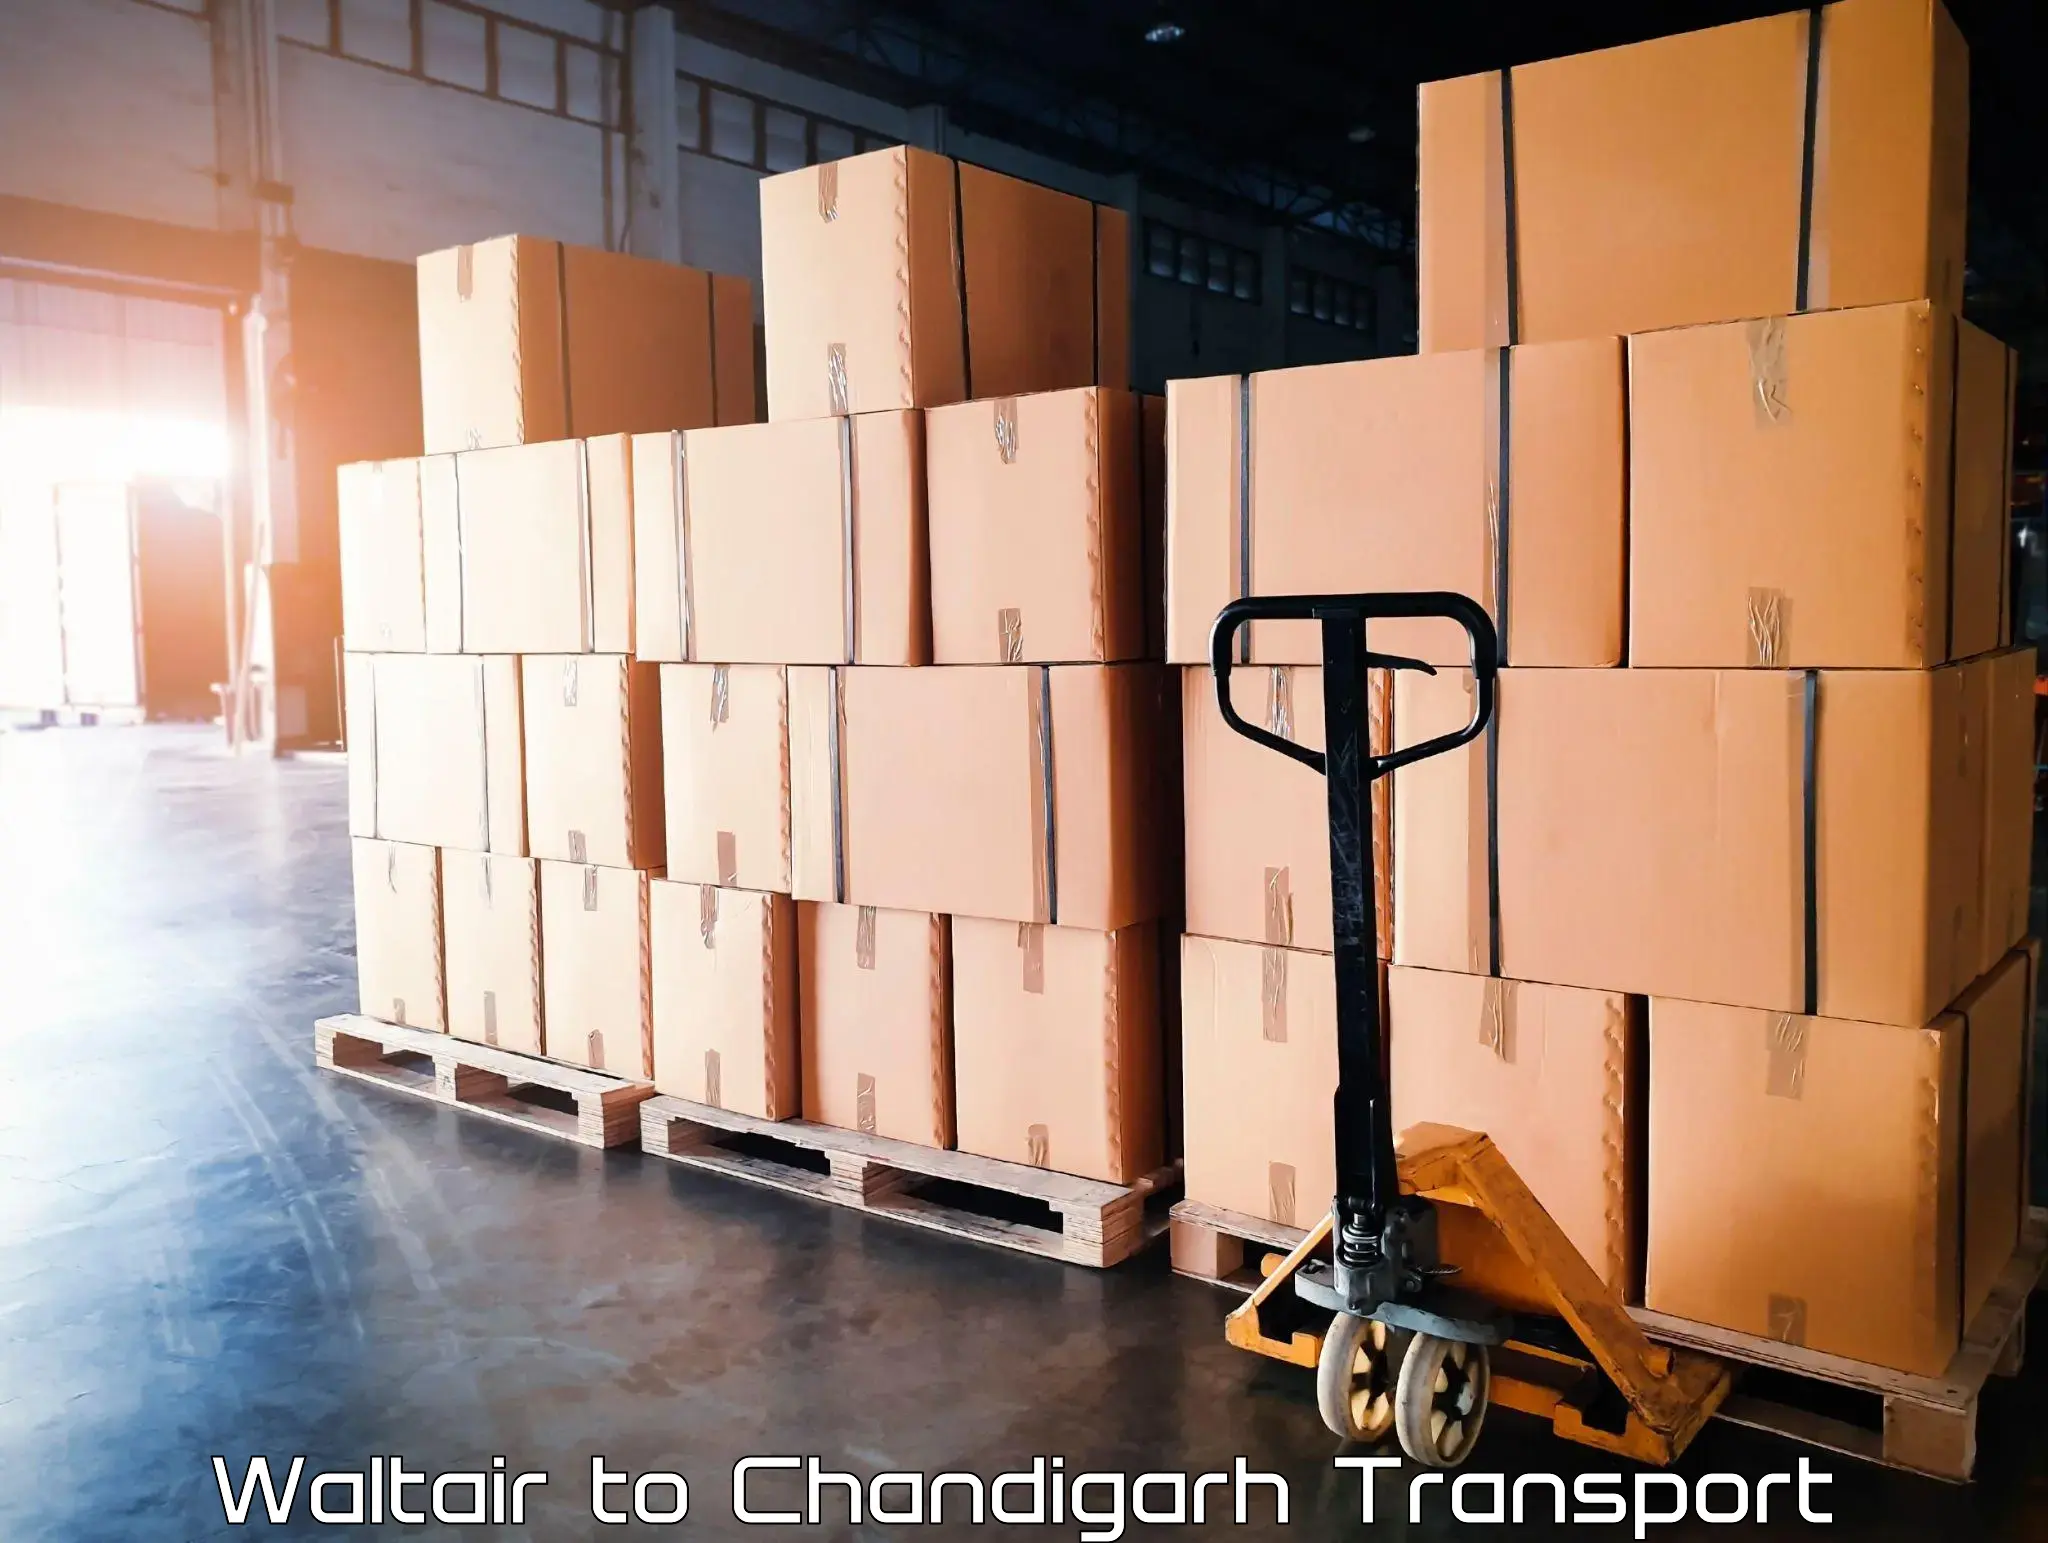 Truck transport companies in India Waltair to Chandigarh